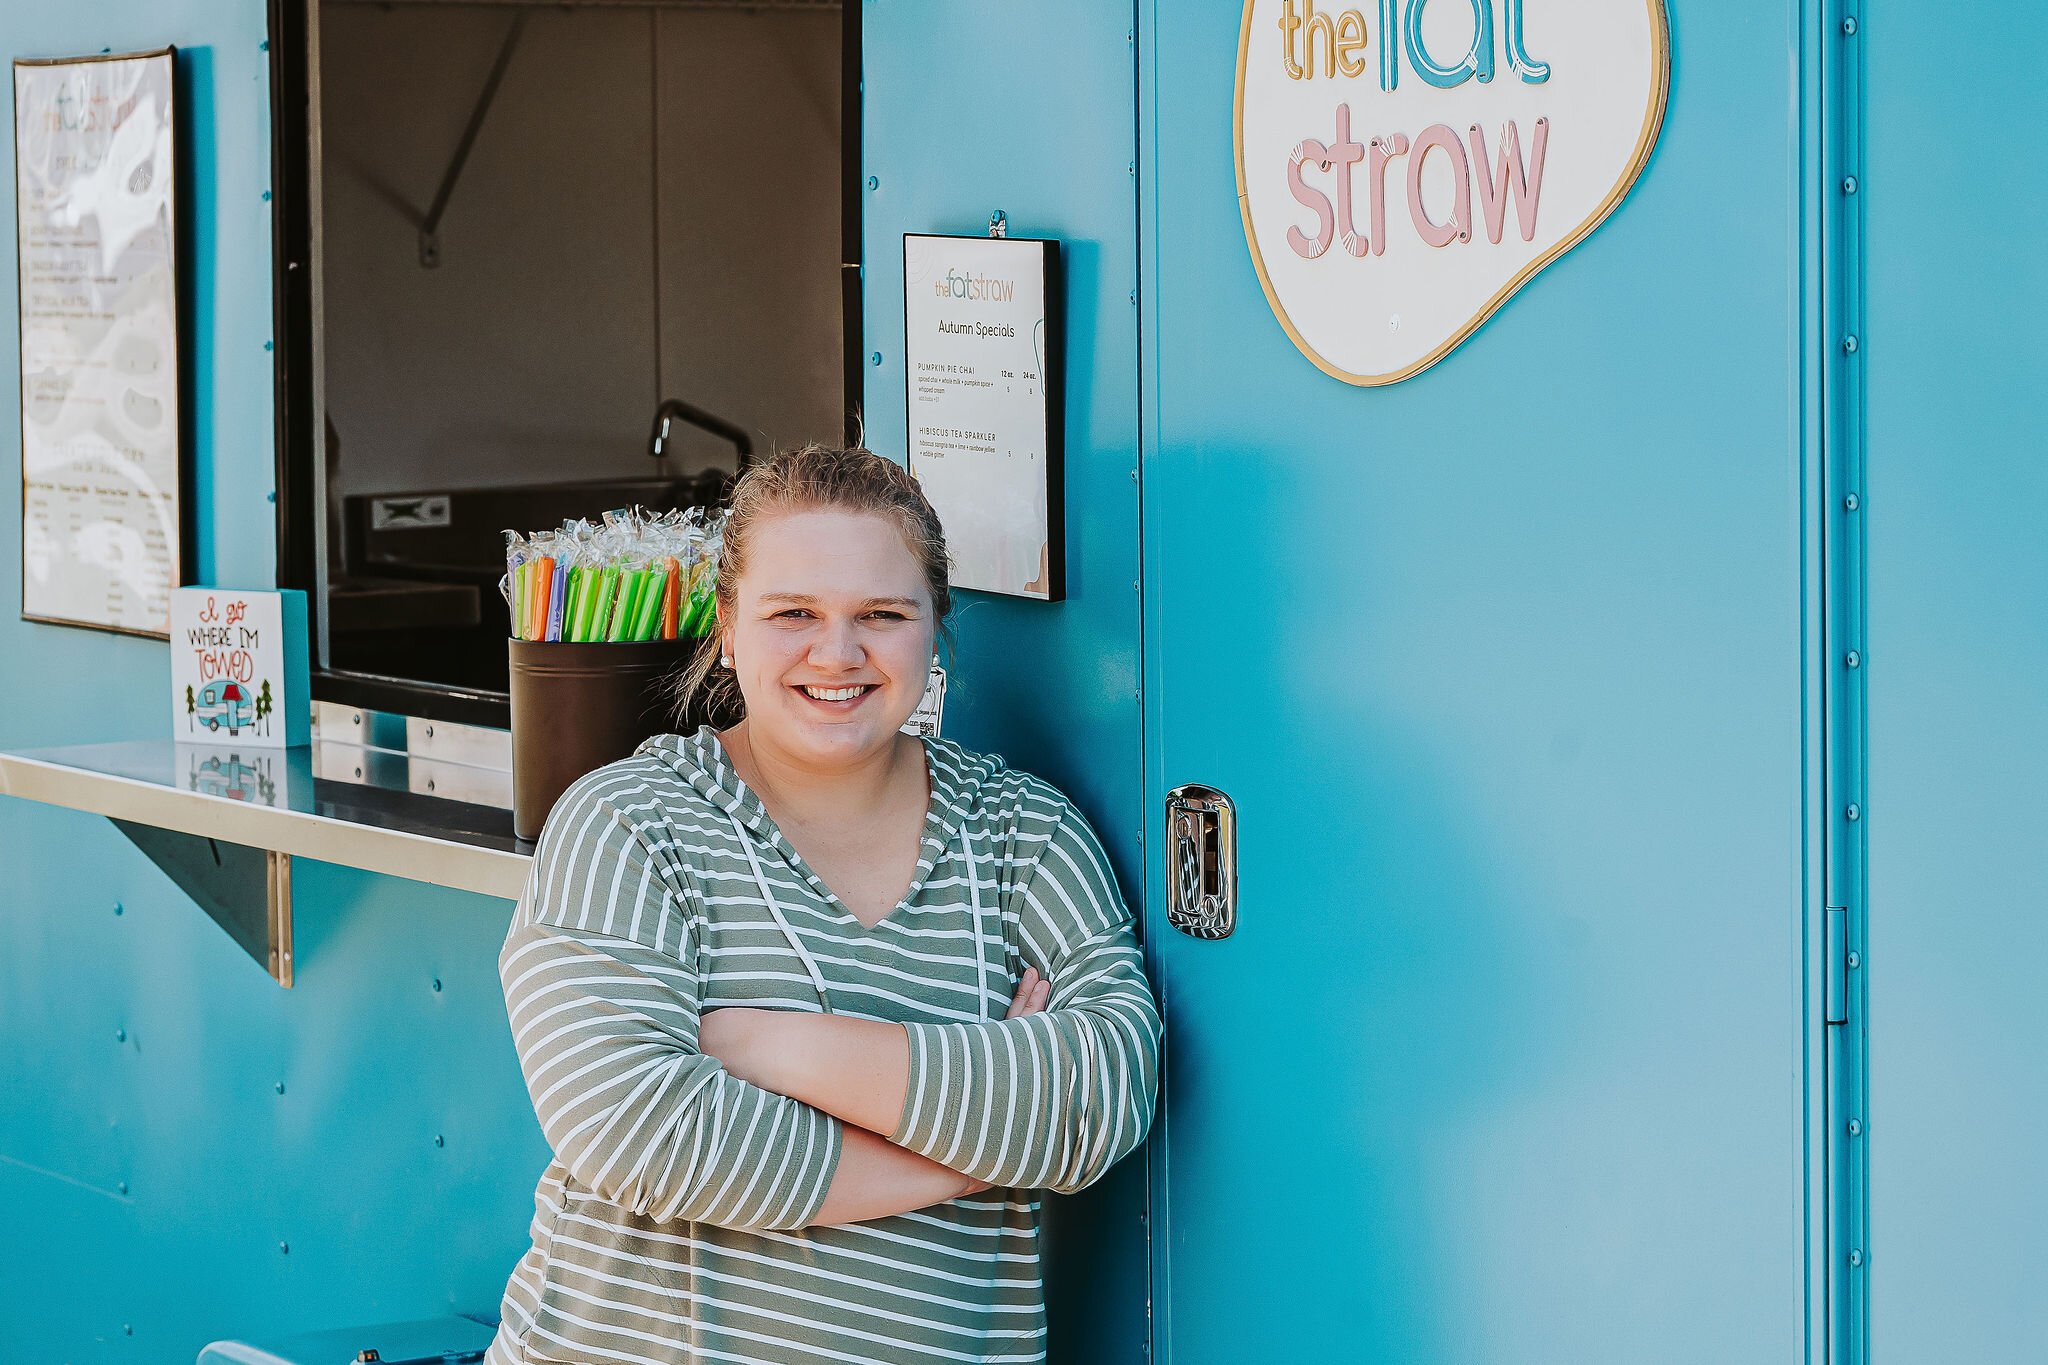 Katie Wiseman is the owner of Clark County's new boba tea truck - The Fat Straw.